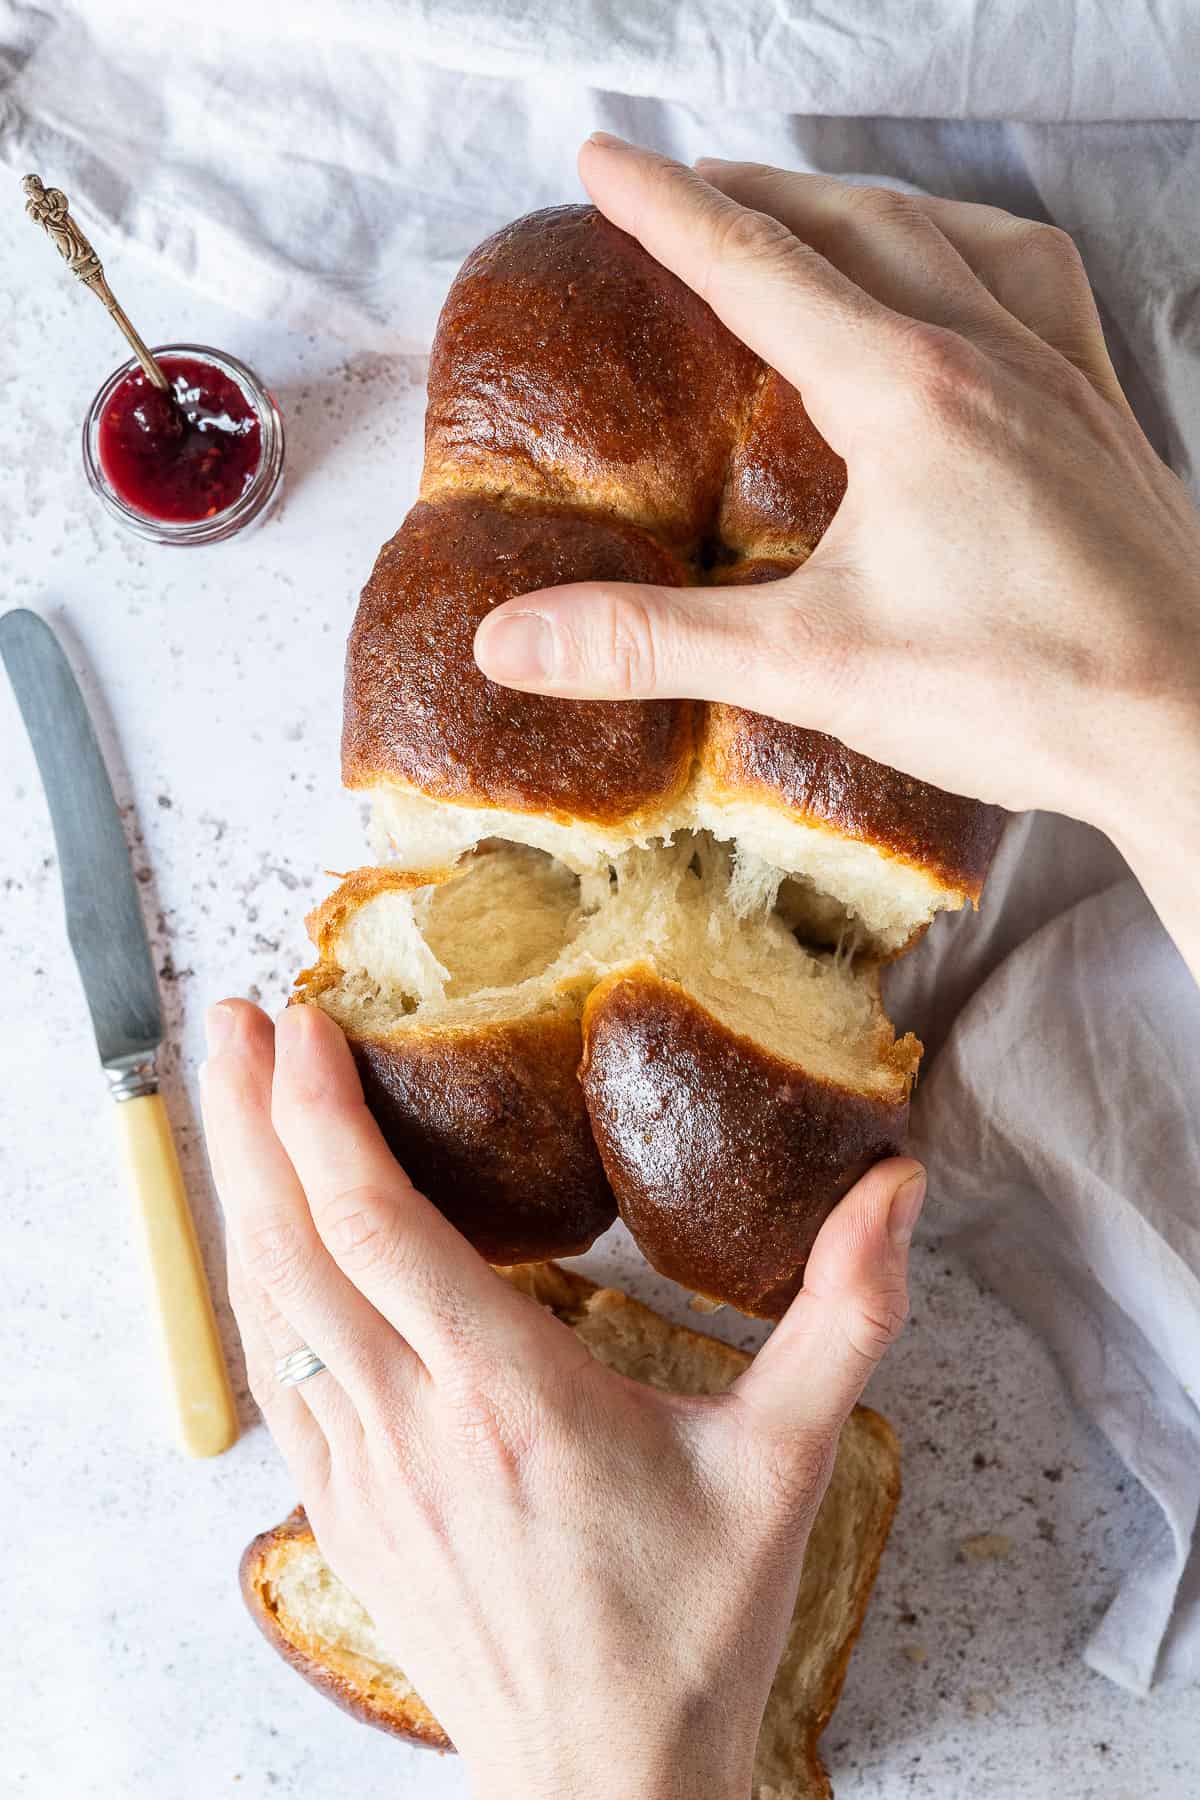 A loaf of brioche being torn apart by hands.